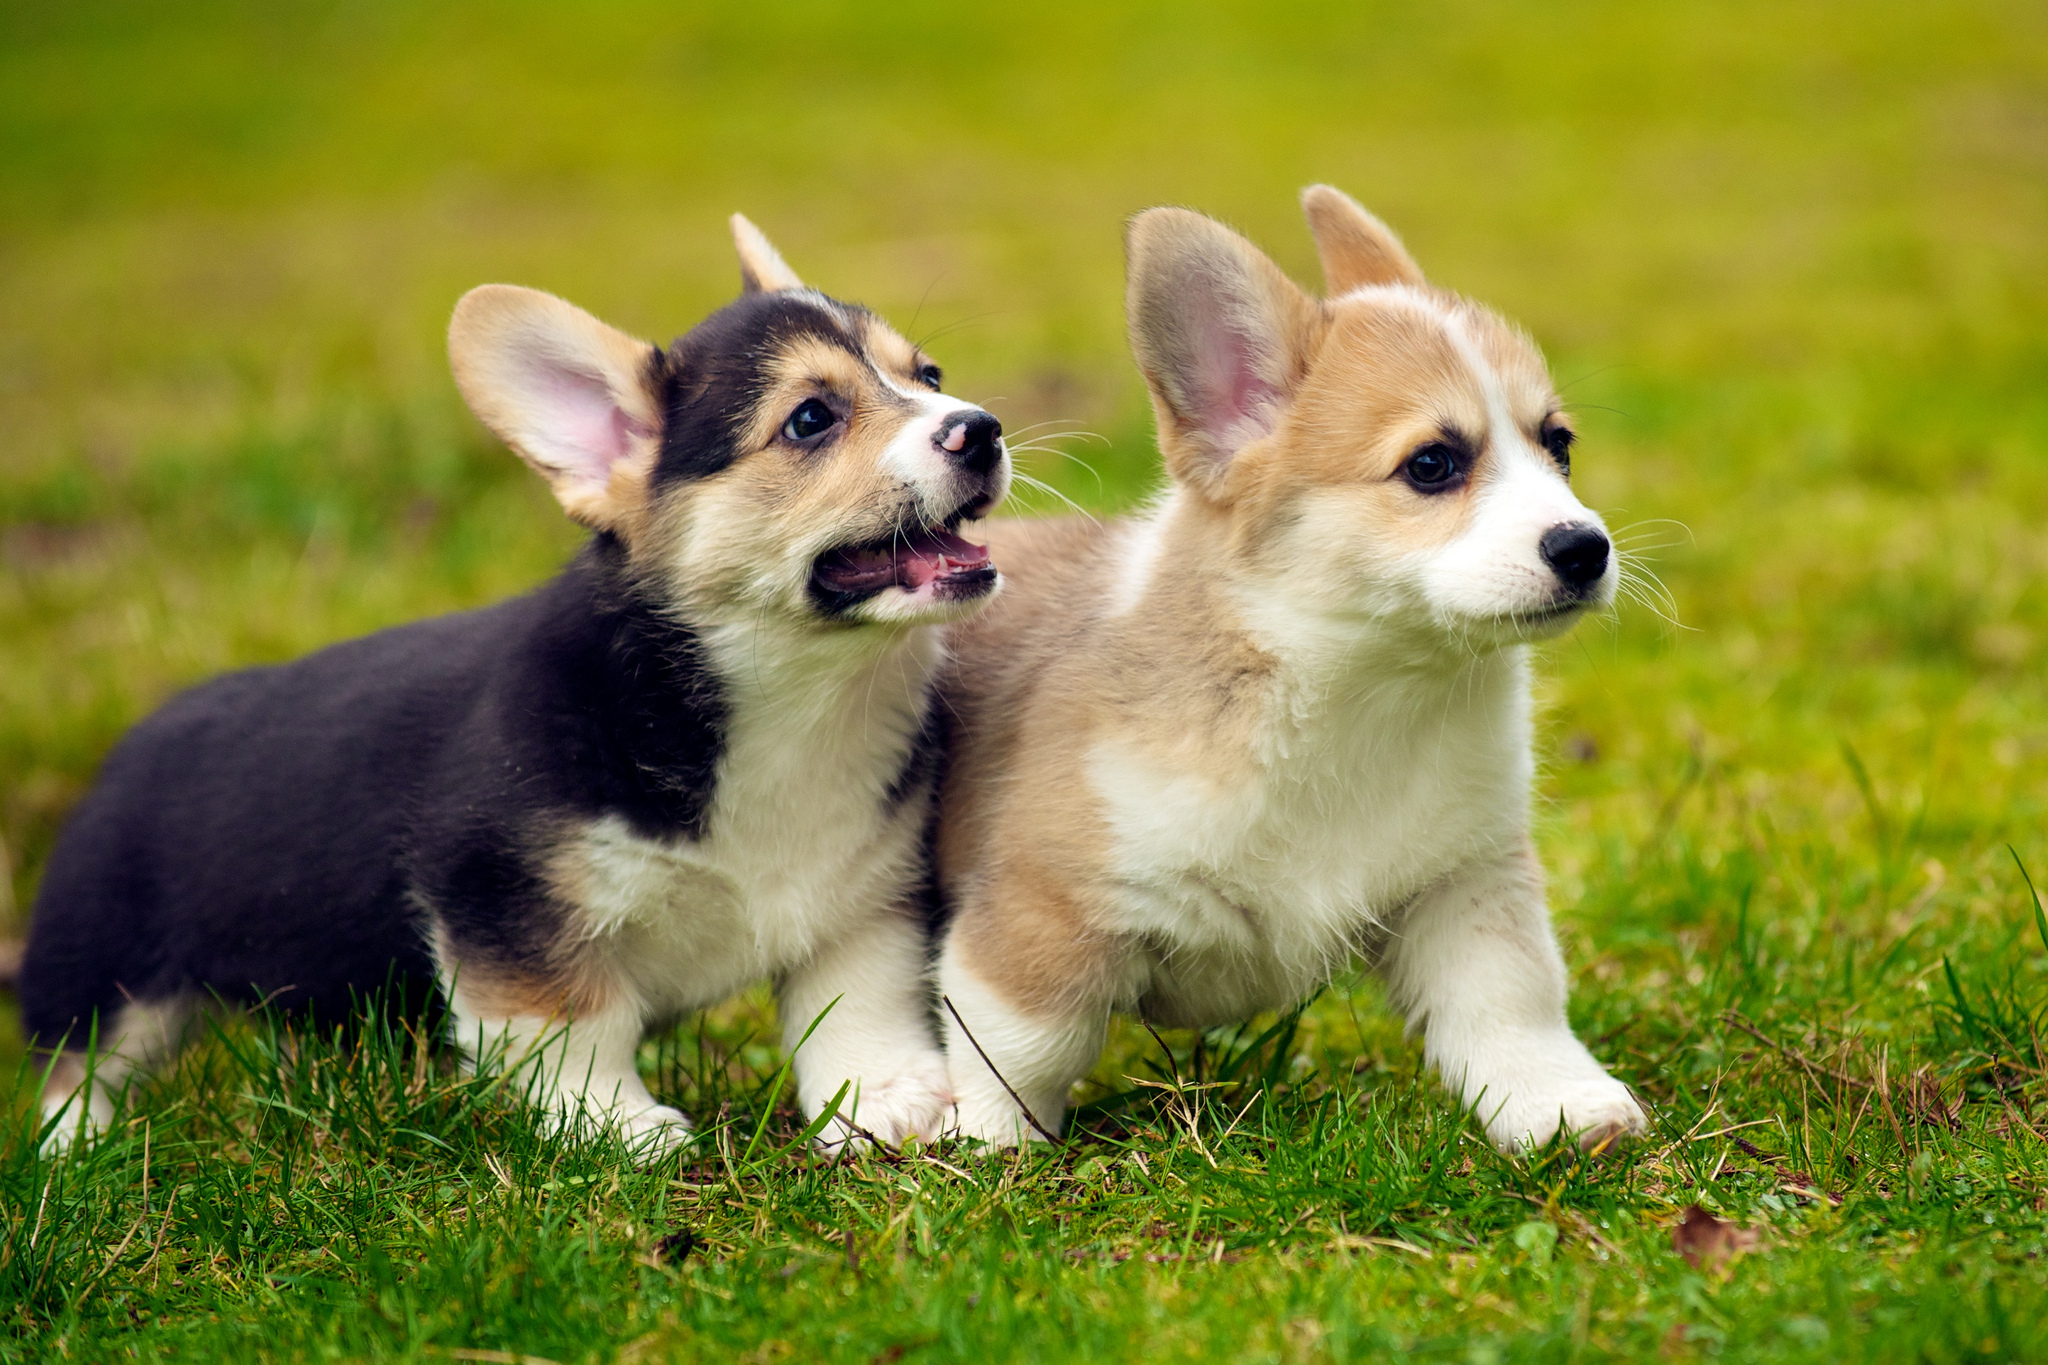 this is a photo of cute puppies